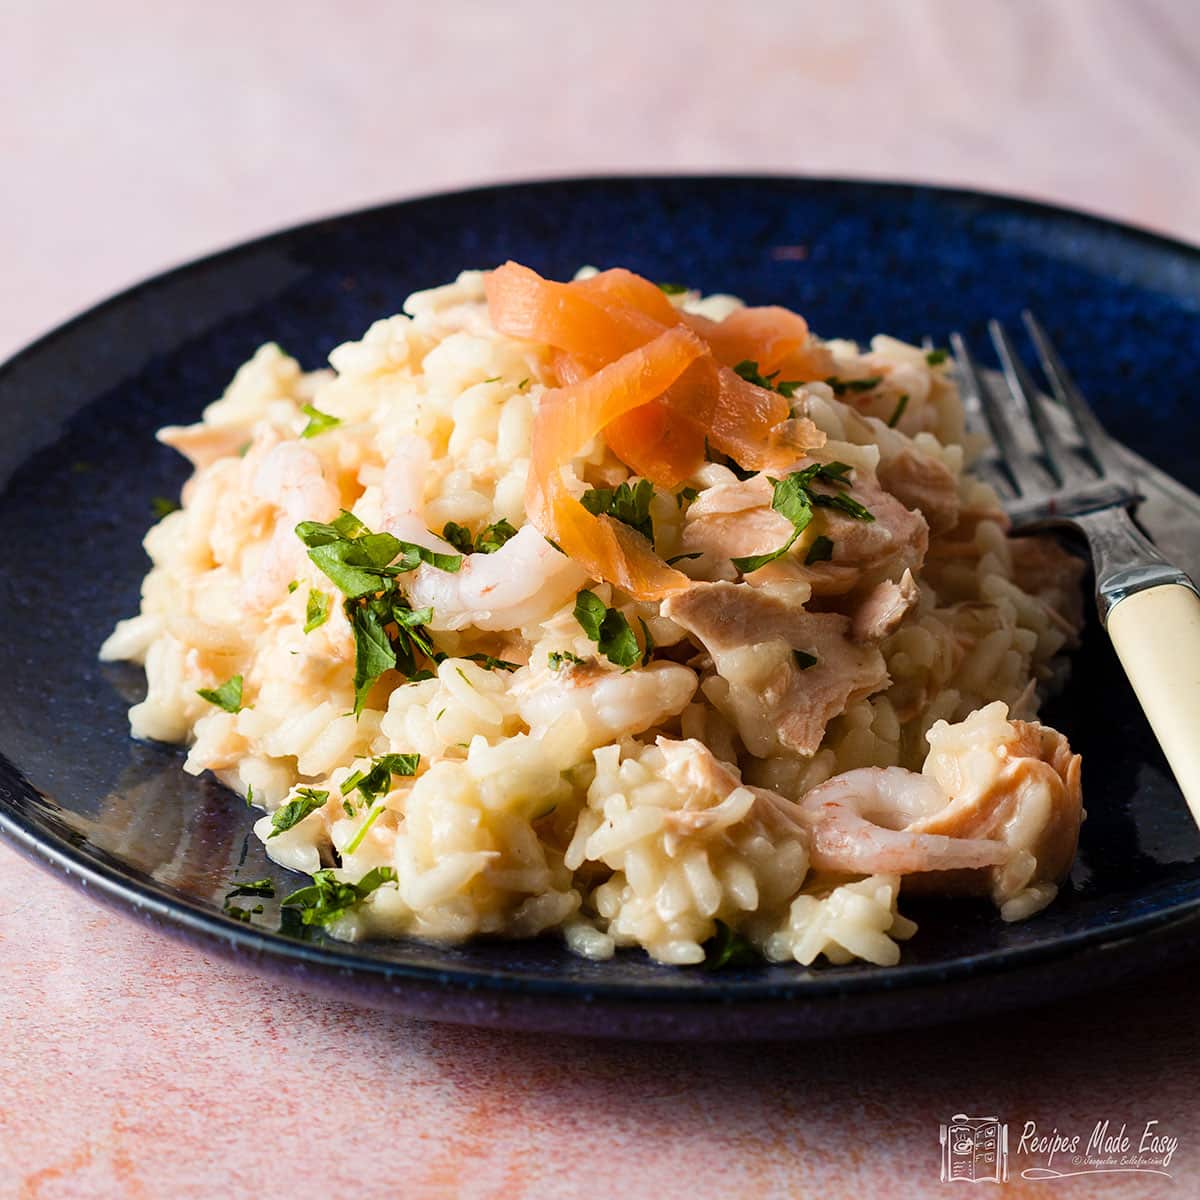 Portion of salmon and prawn risotto on a blue plate with knife and fork on the side.